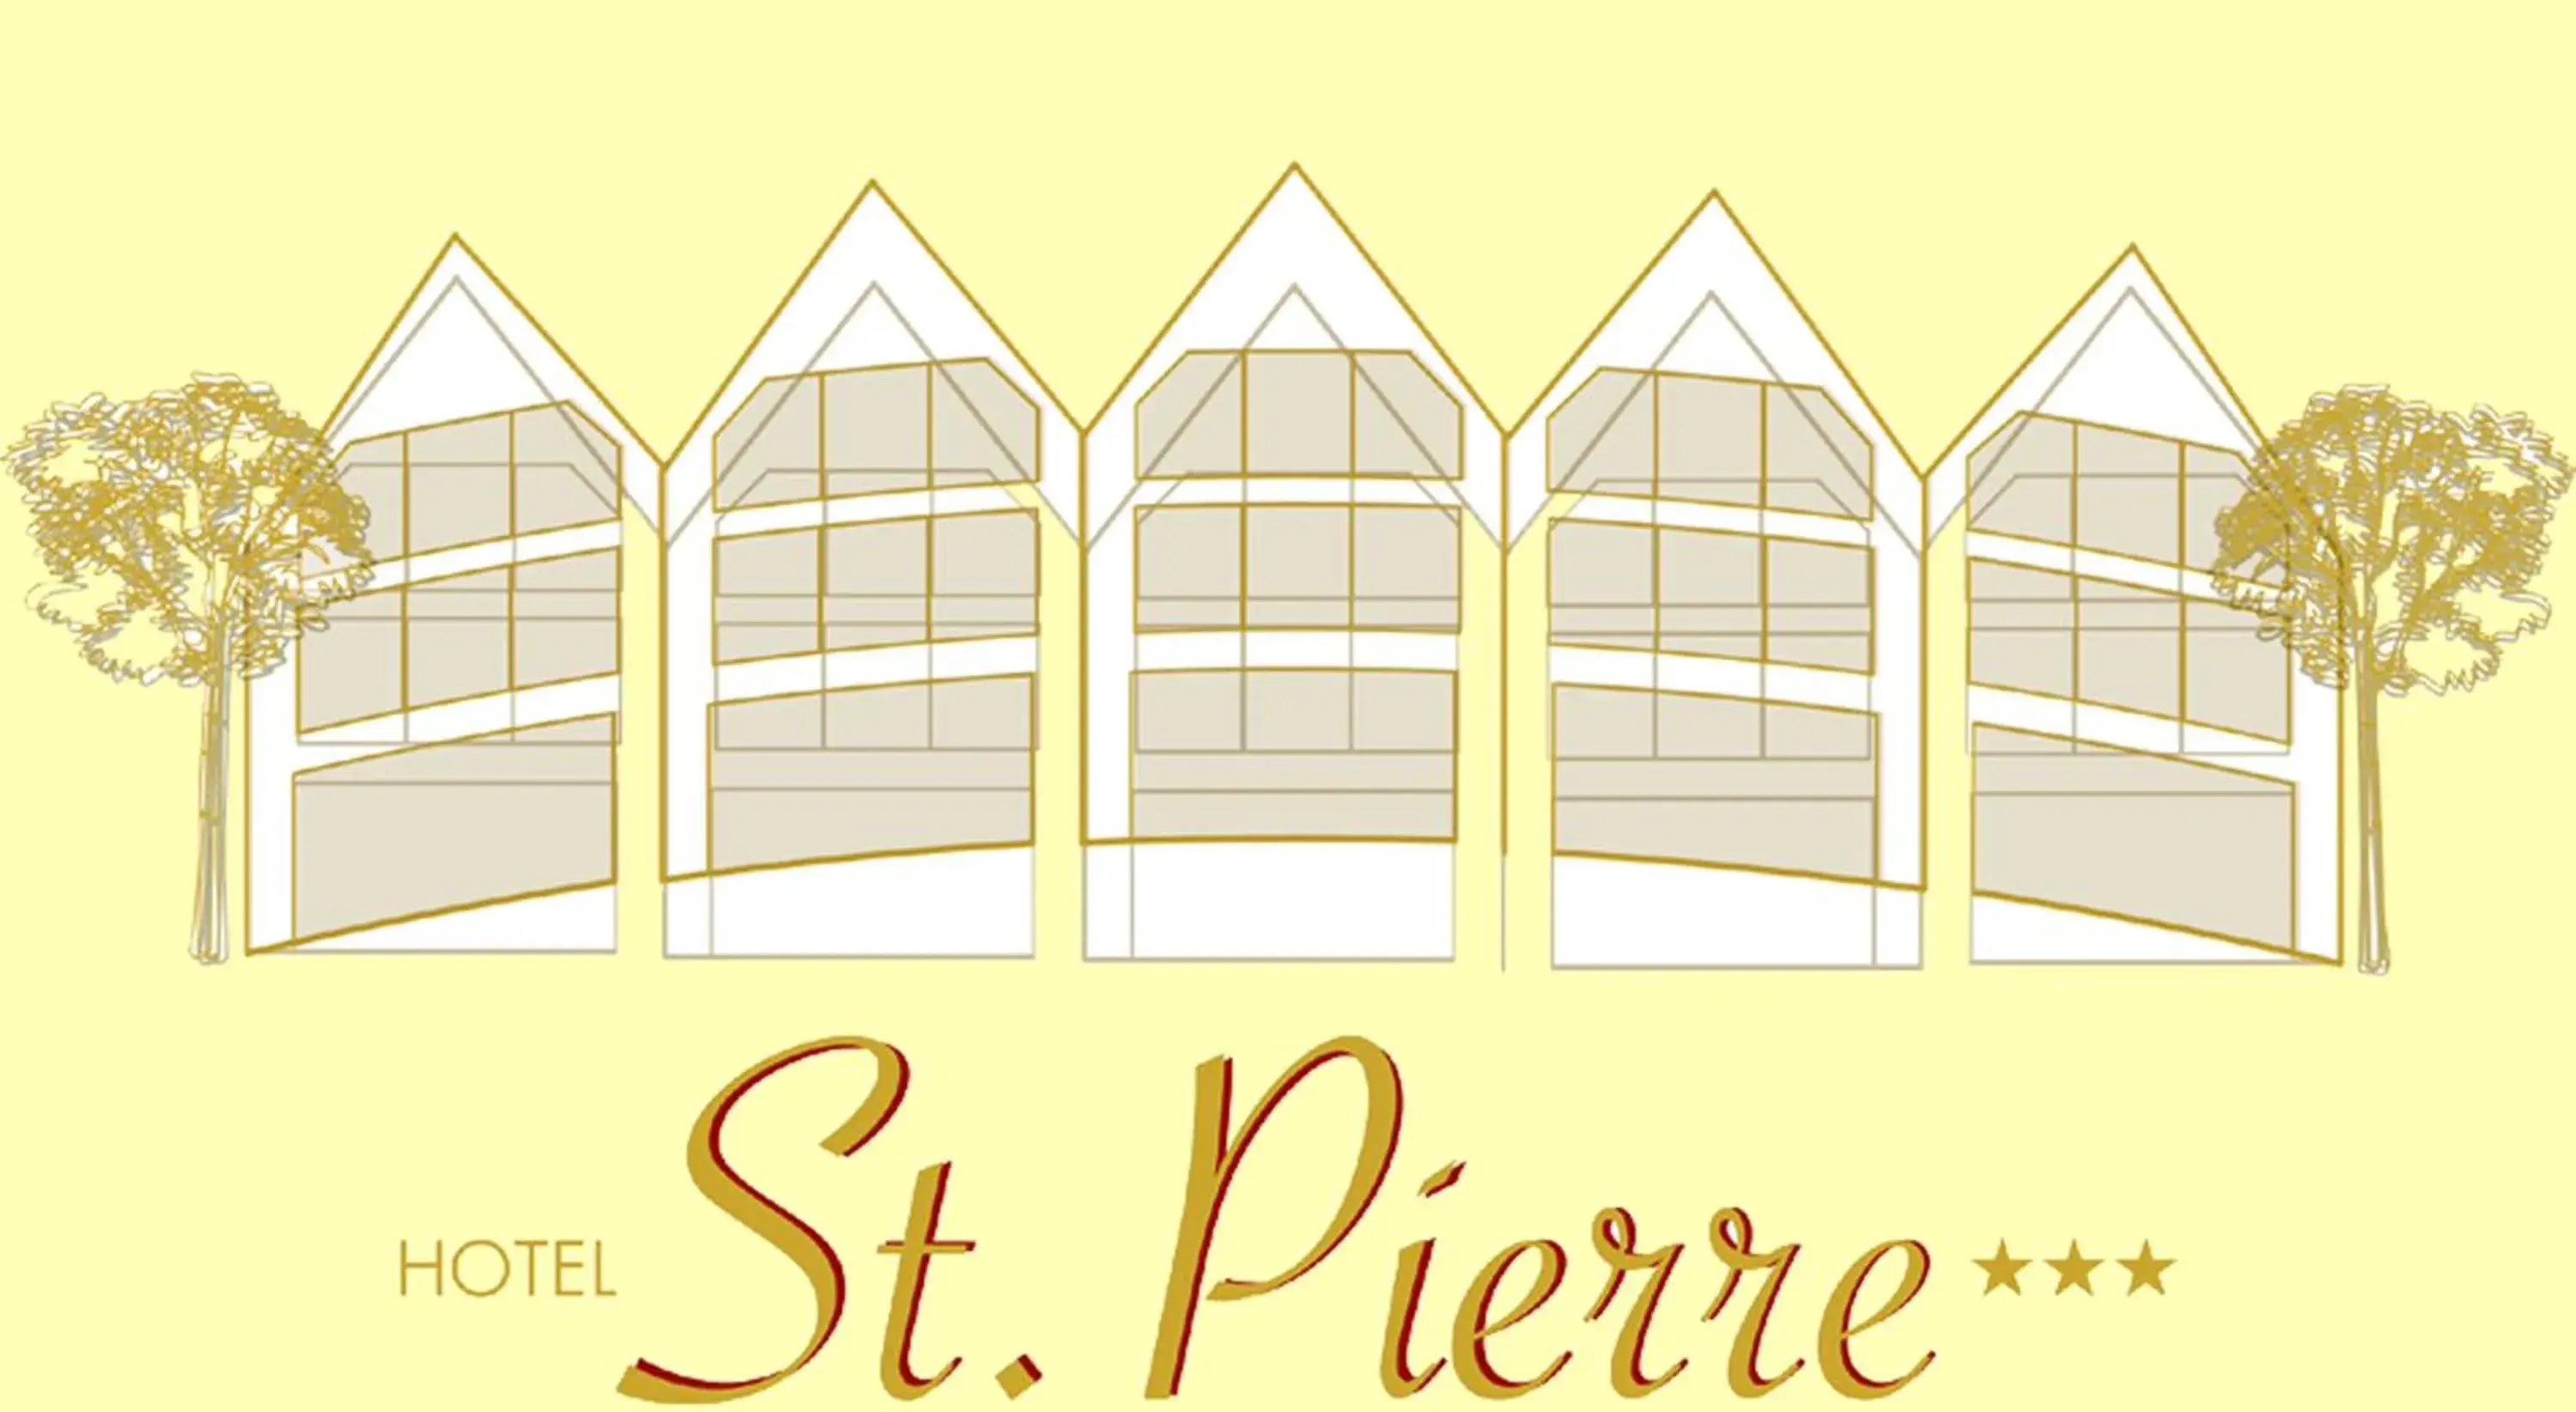 Property logo or sign, Property Logo/Sign in Hotel St. Pierre